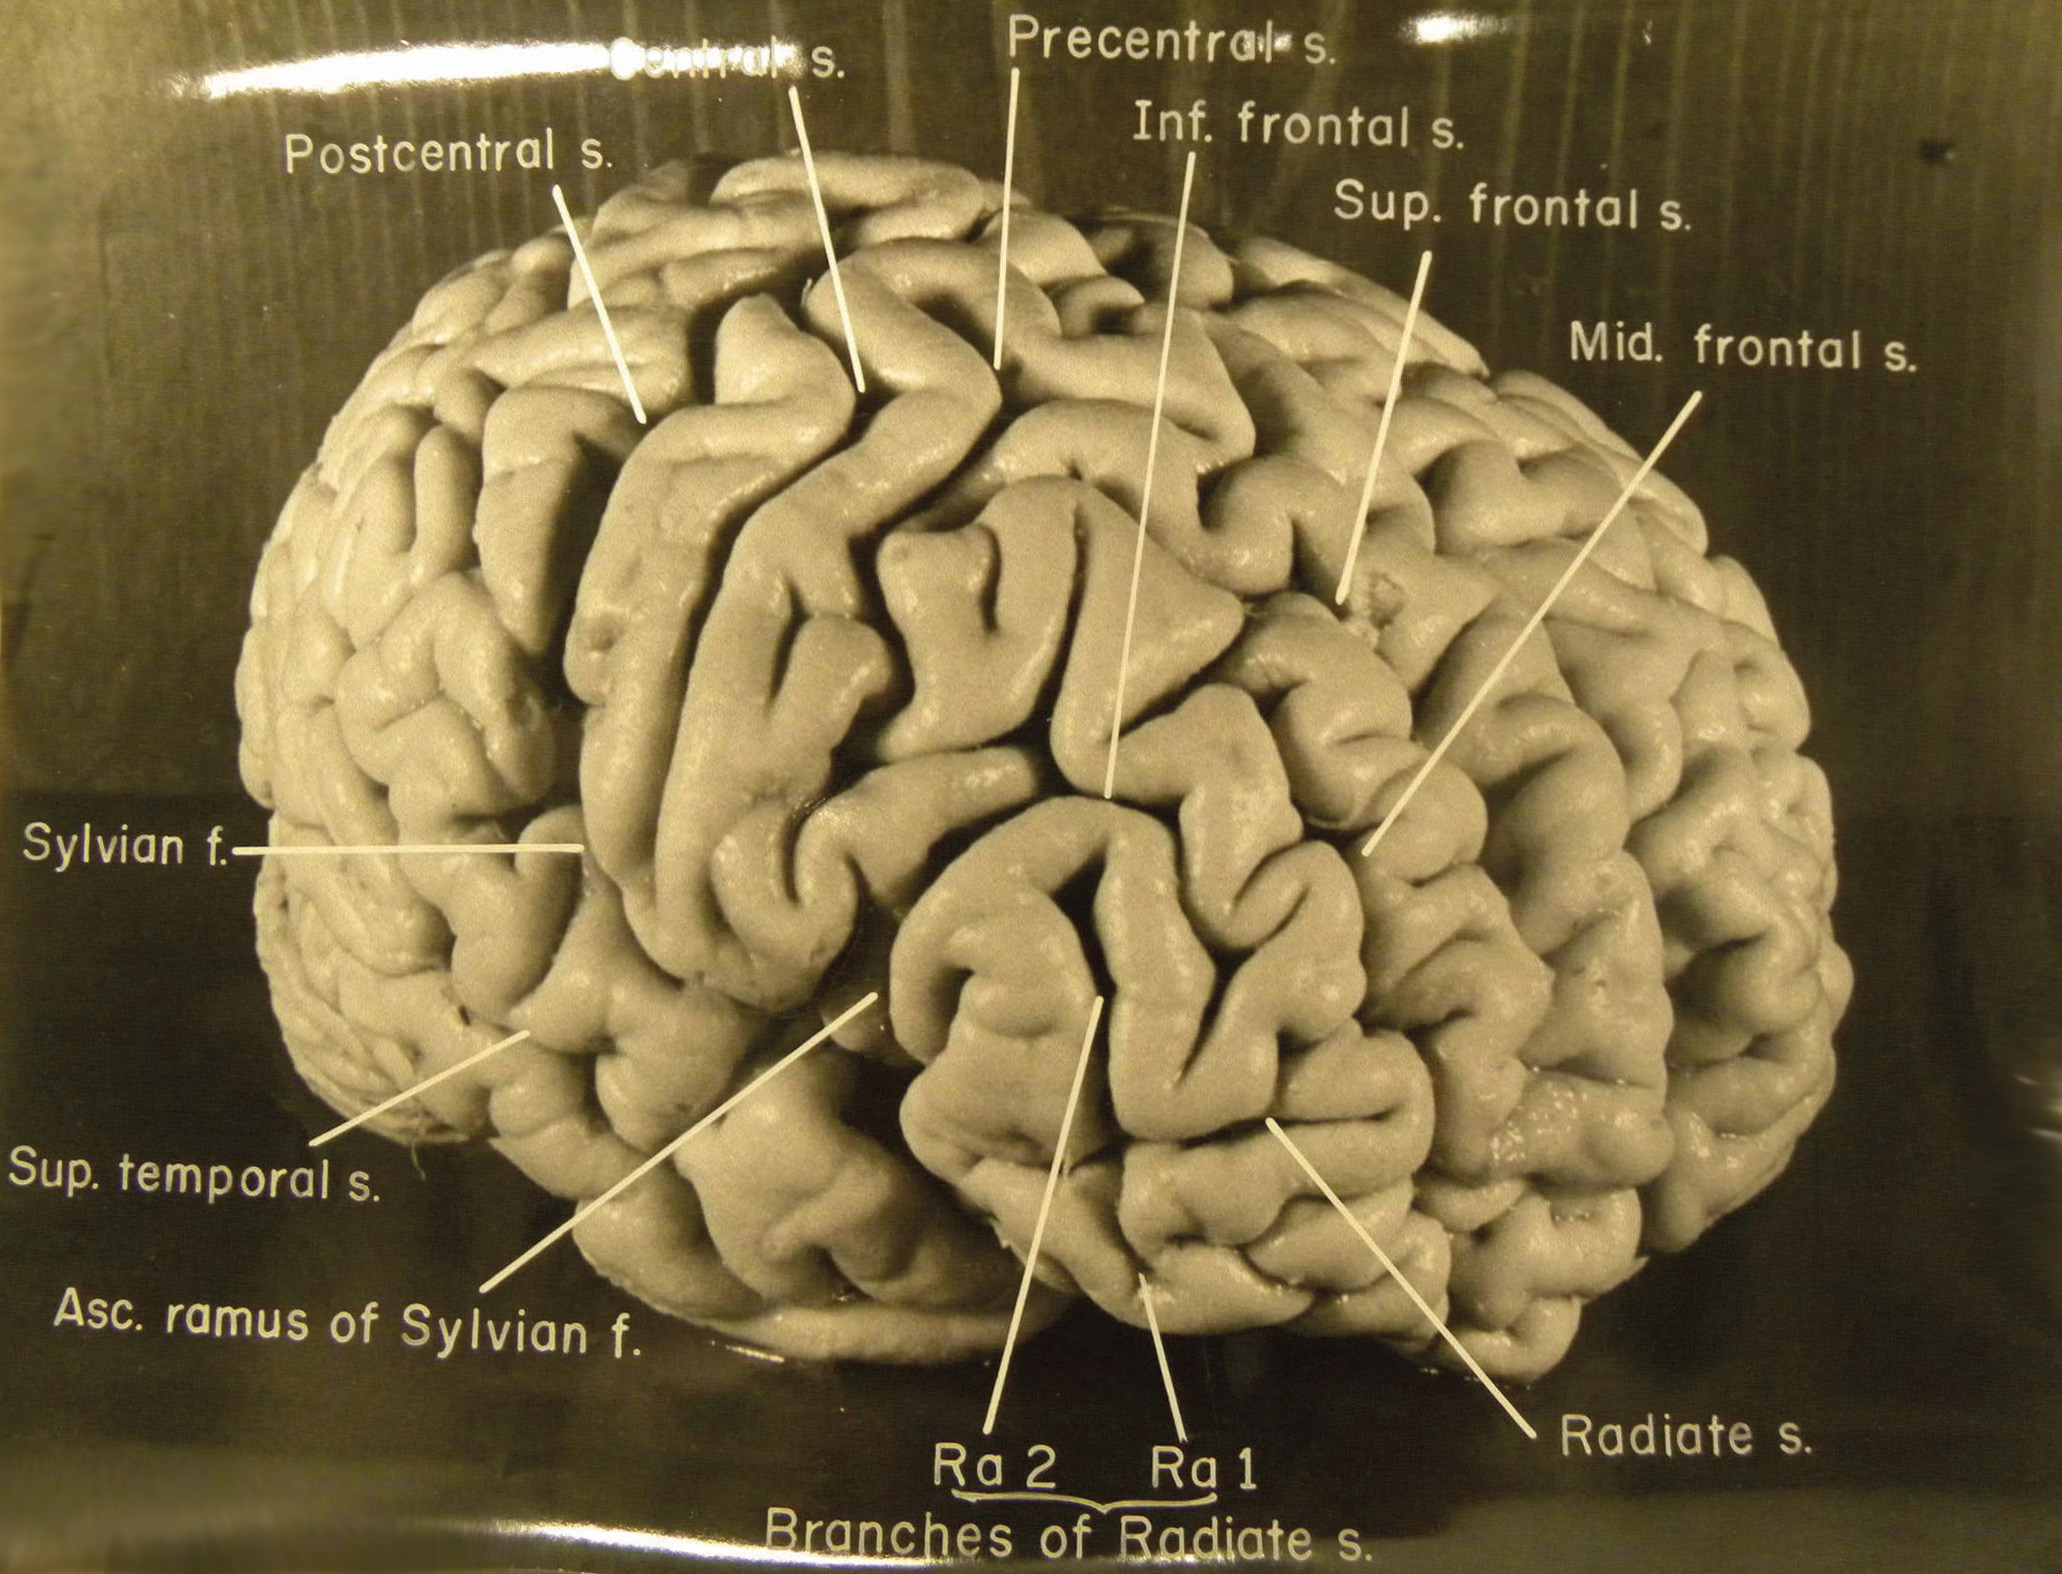 As an avowed atheist, and to avoid idolization, Einstein stipulated in his will that his body be cremated and his ashes scattered into a New Jersey river. But pathologist Thomas Harvey preserved the great scientist’s brain and eyes, later providing slices of brain tissue for neurological research. Einstein’s brain